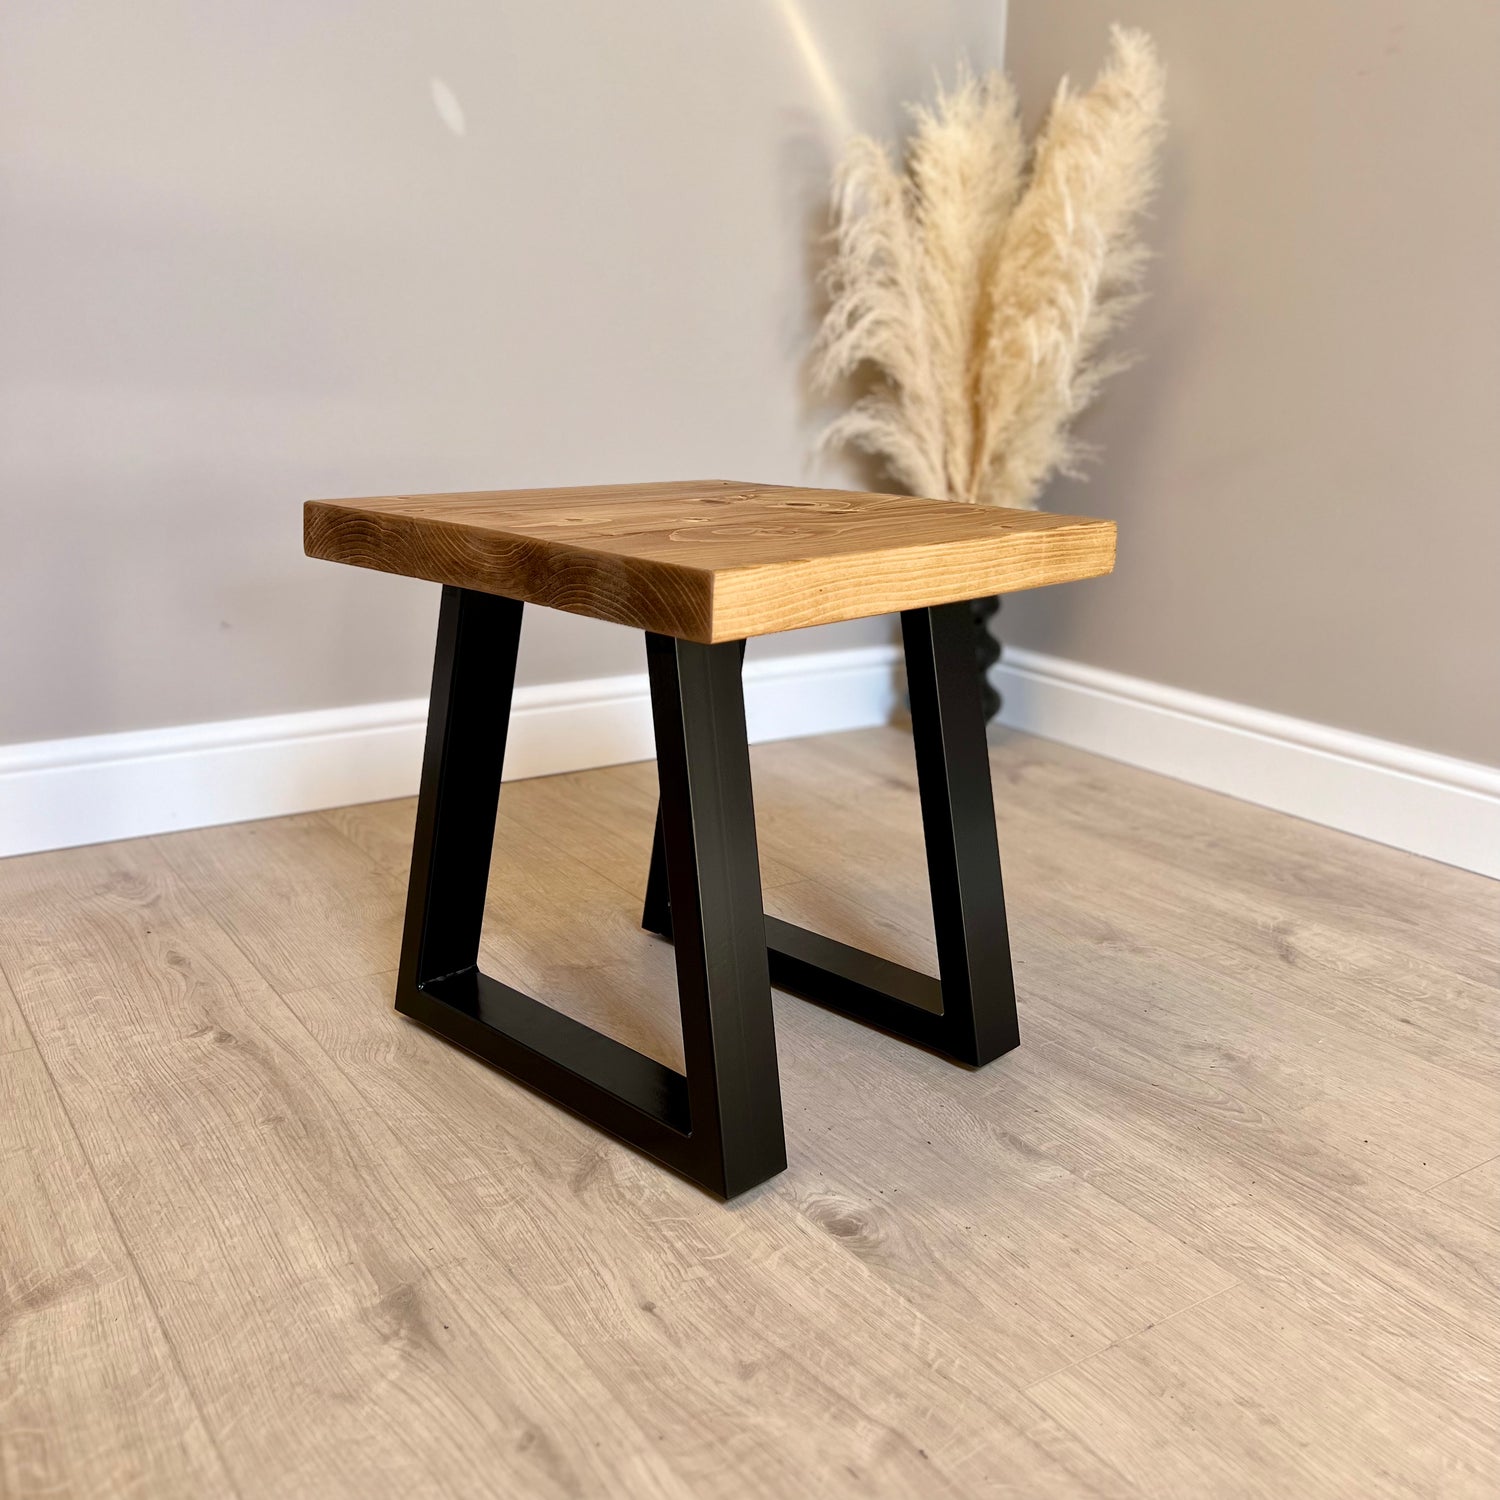 Rustic Coffee table, Bedside Table, side table - Trapeze legs Tables masterplank-shop   